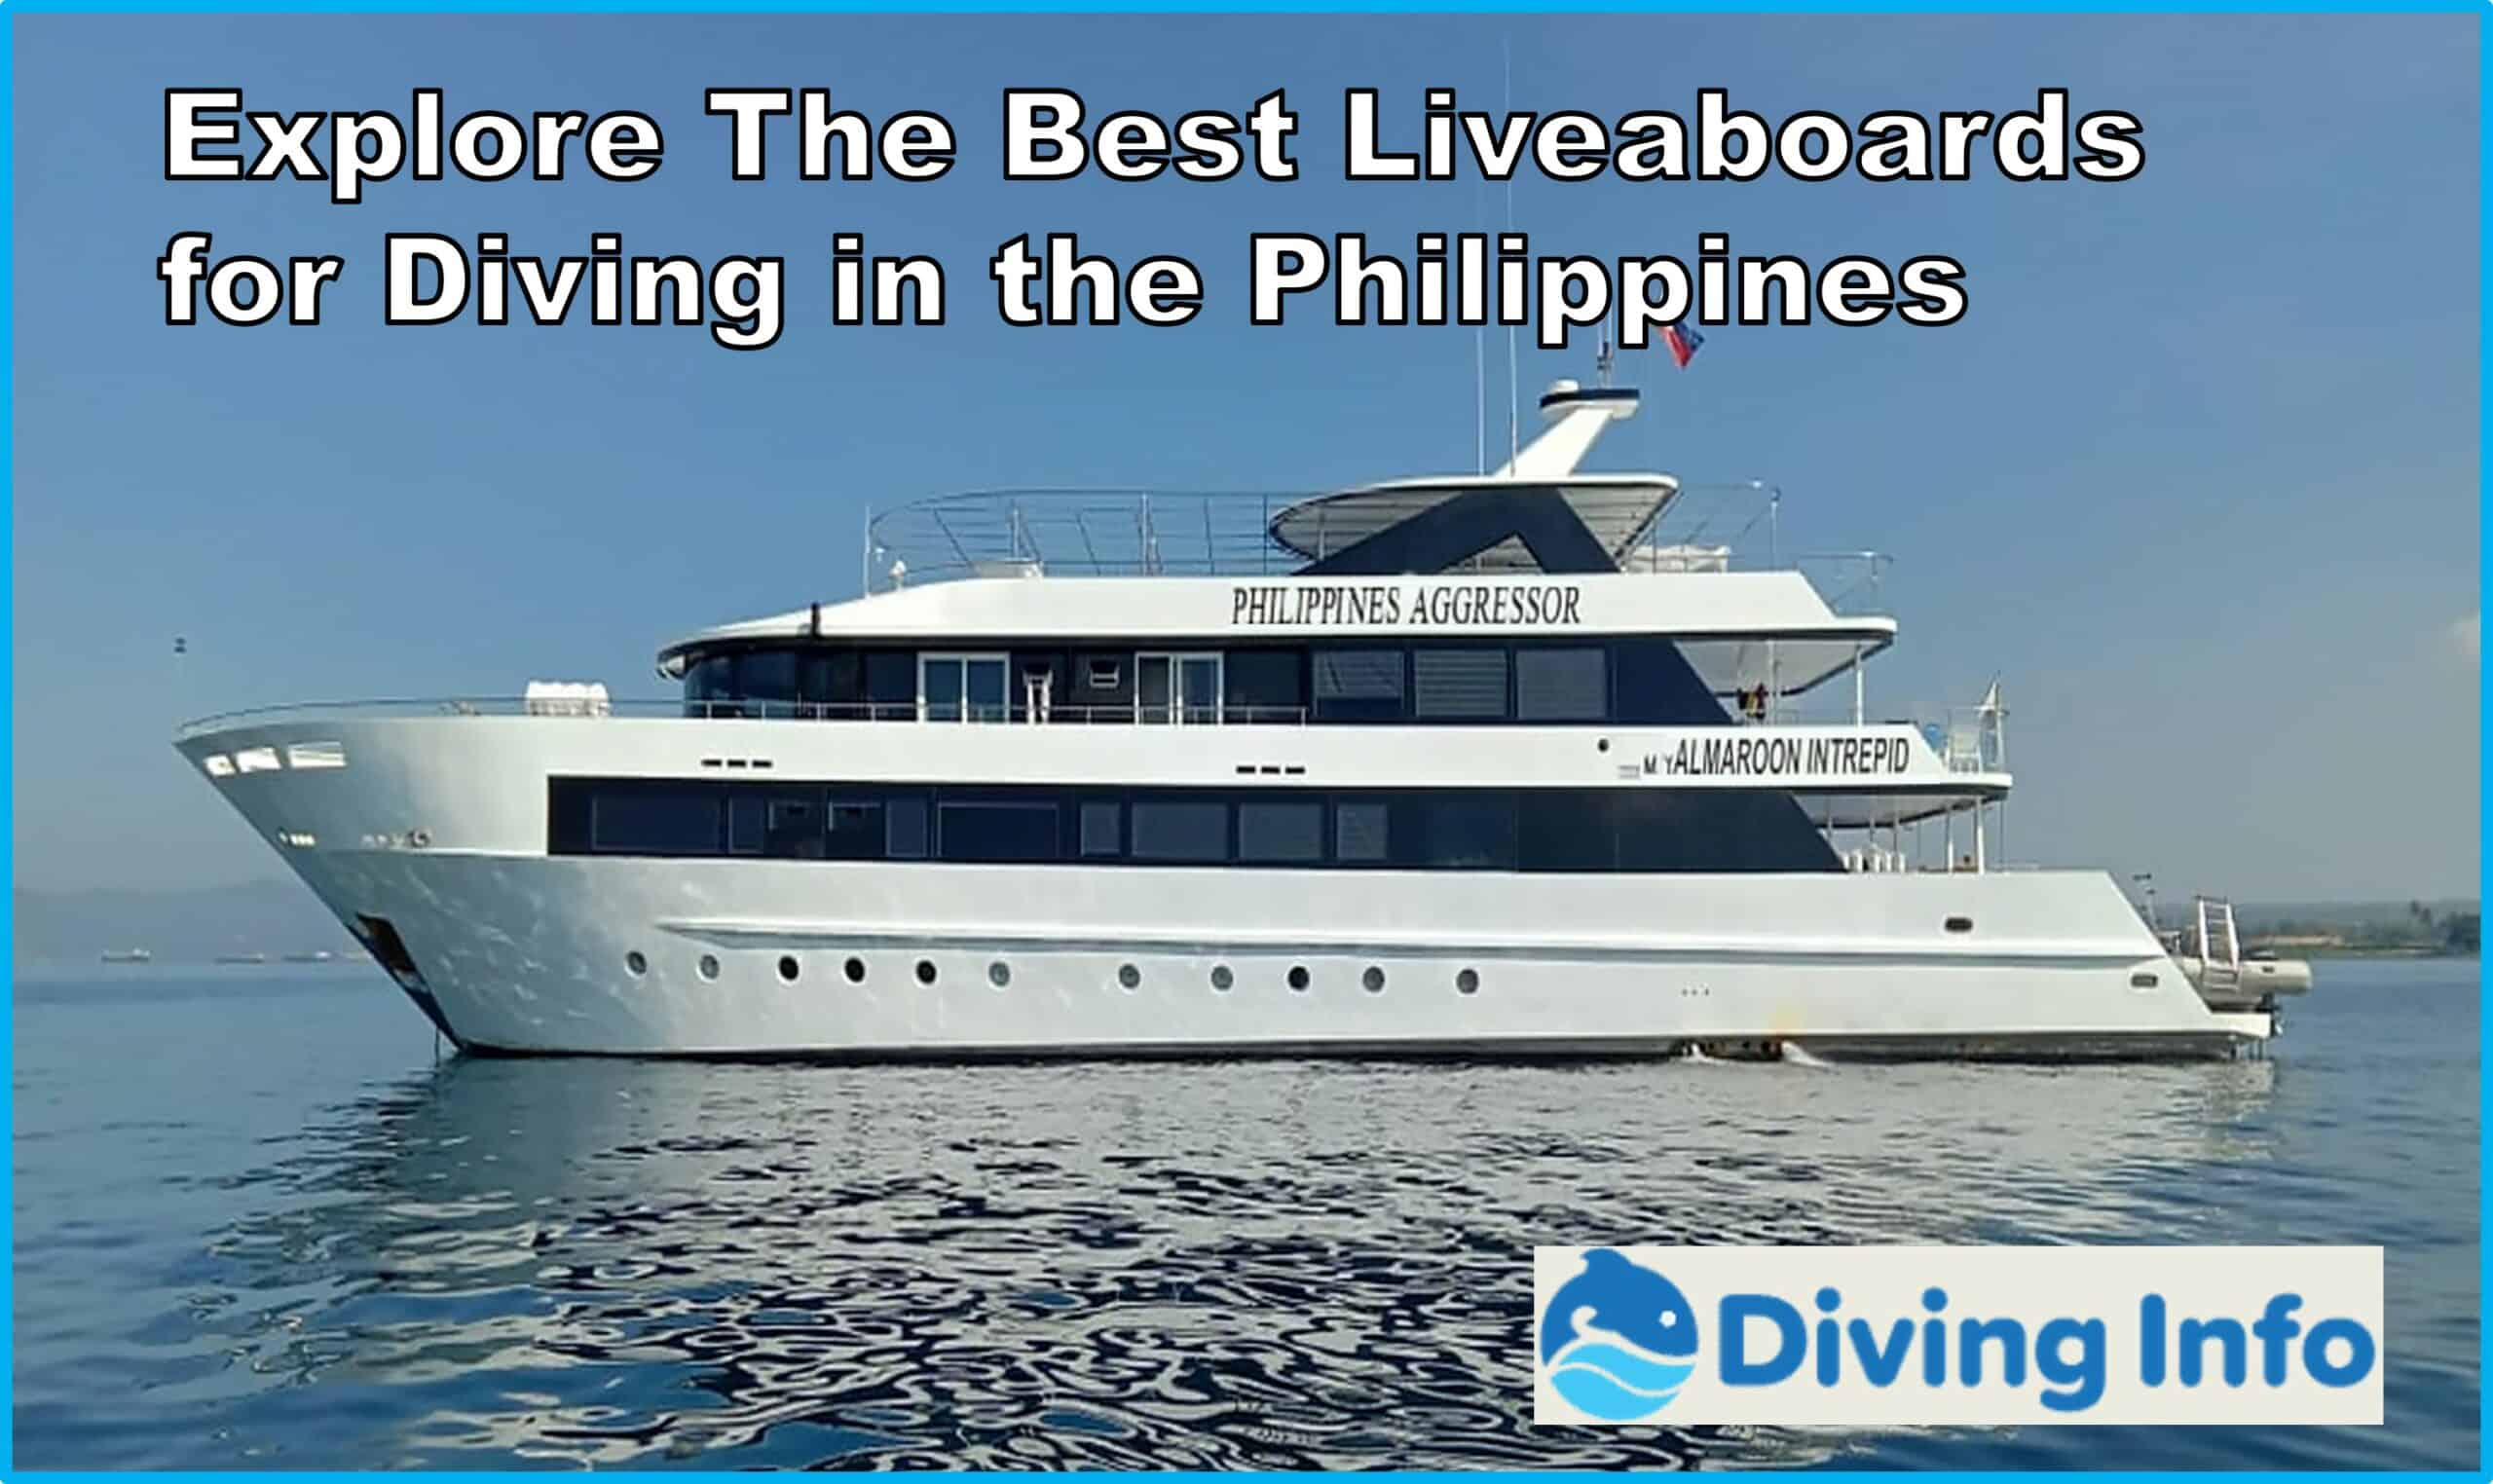 Philippines Liveaboard